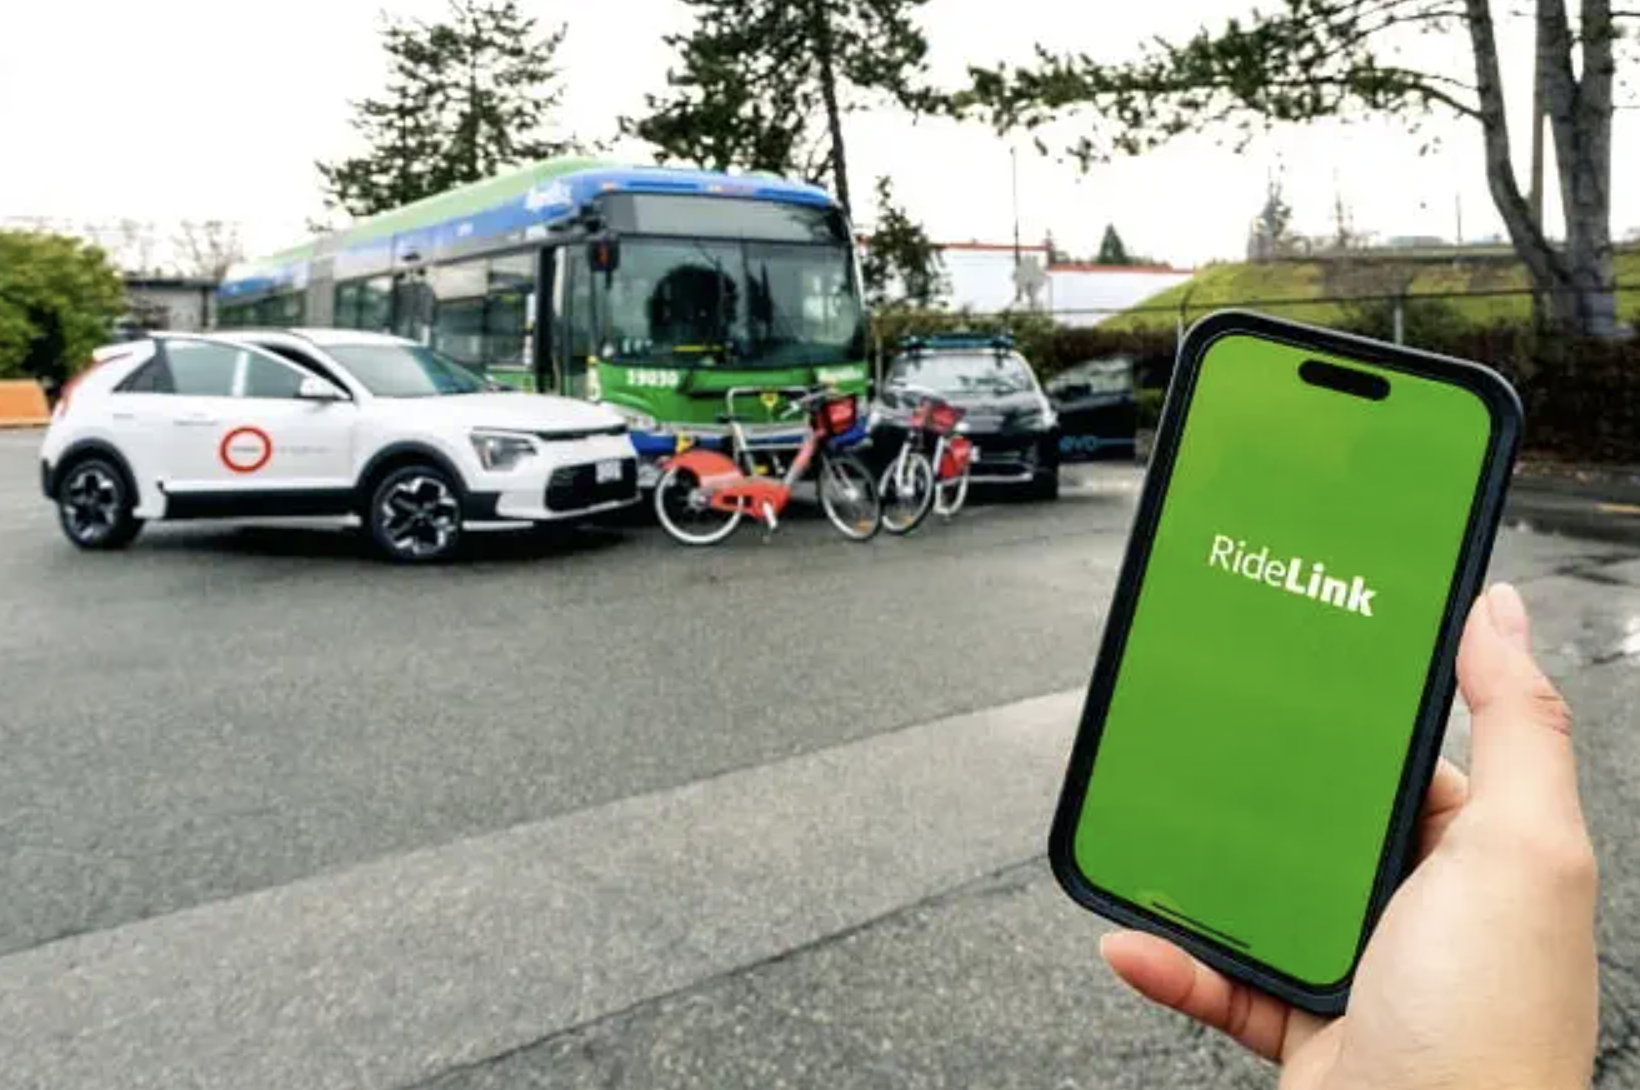 New app integrates transit, carshare, and bikeshare services in one place